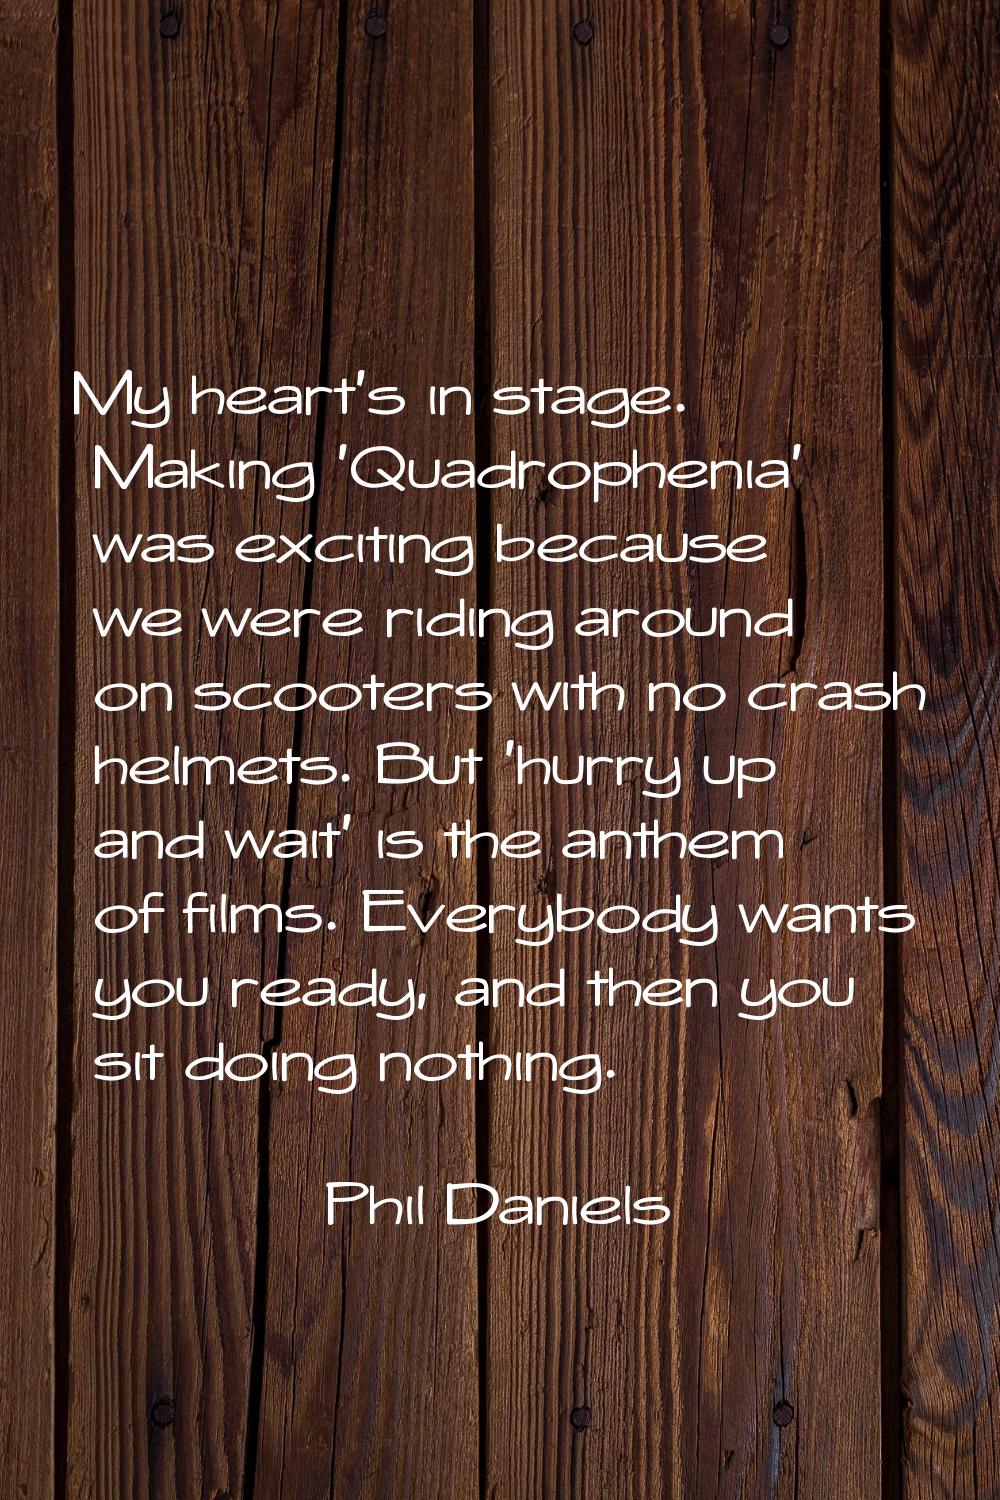 My heart's in stage. Making 'Quadrophenia' was exciting because we were riding around on scooters w